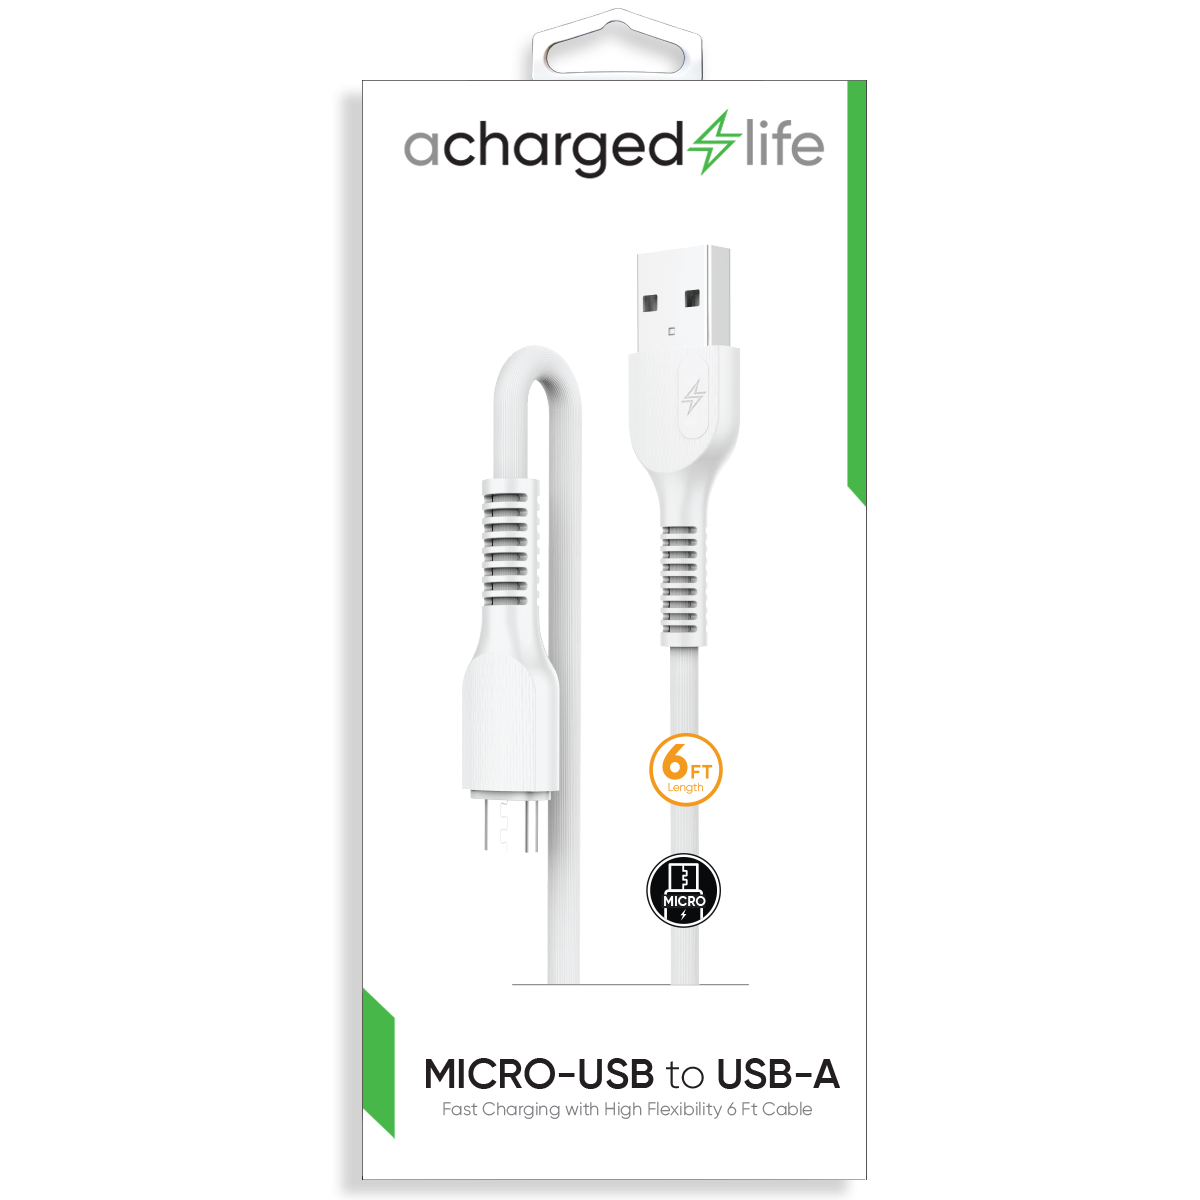 CL104 - Fast Charging Cable Micro USB 6Ft White